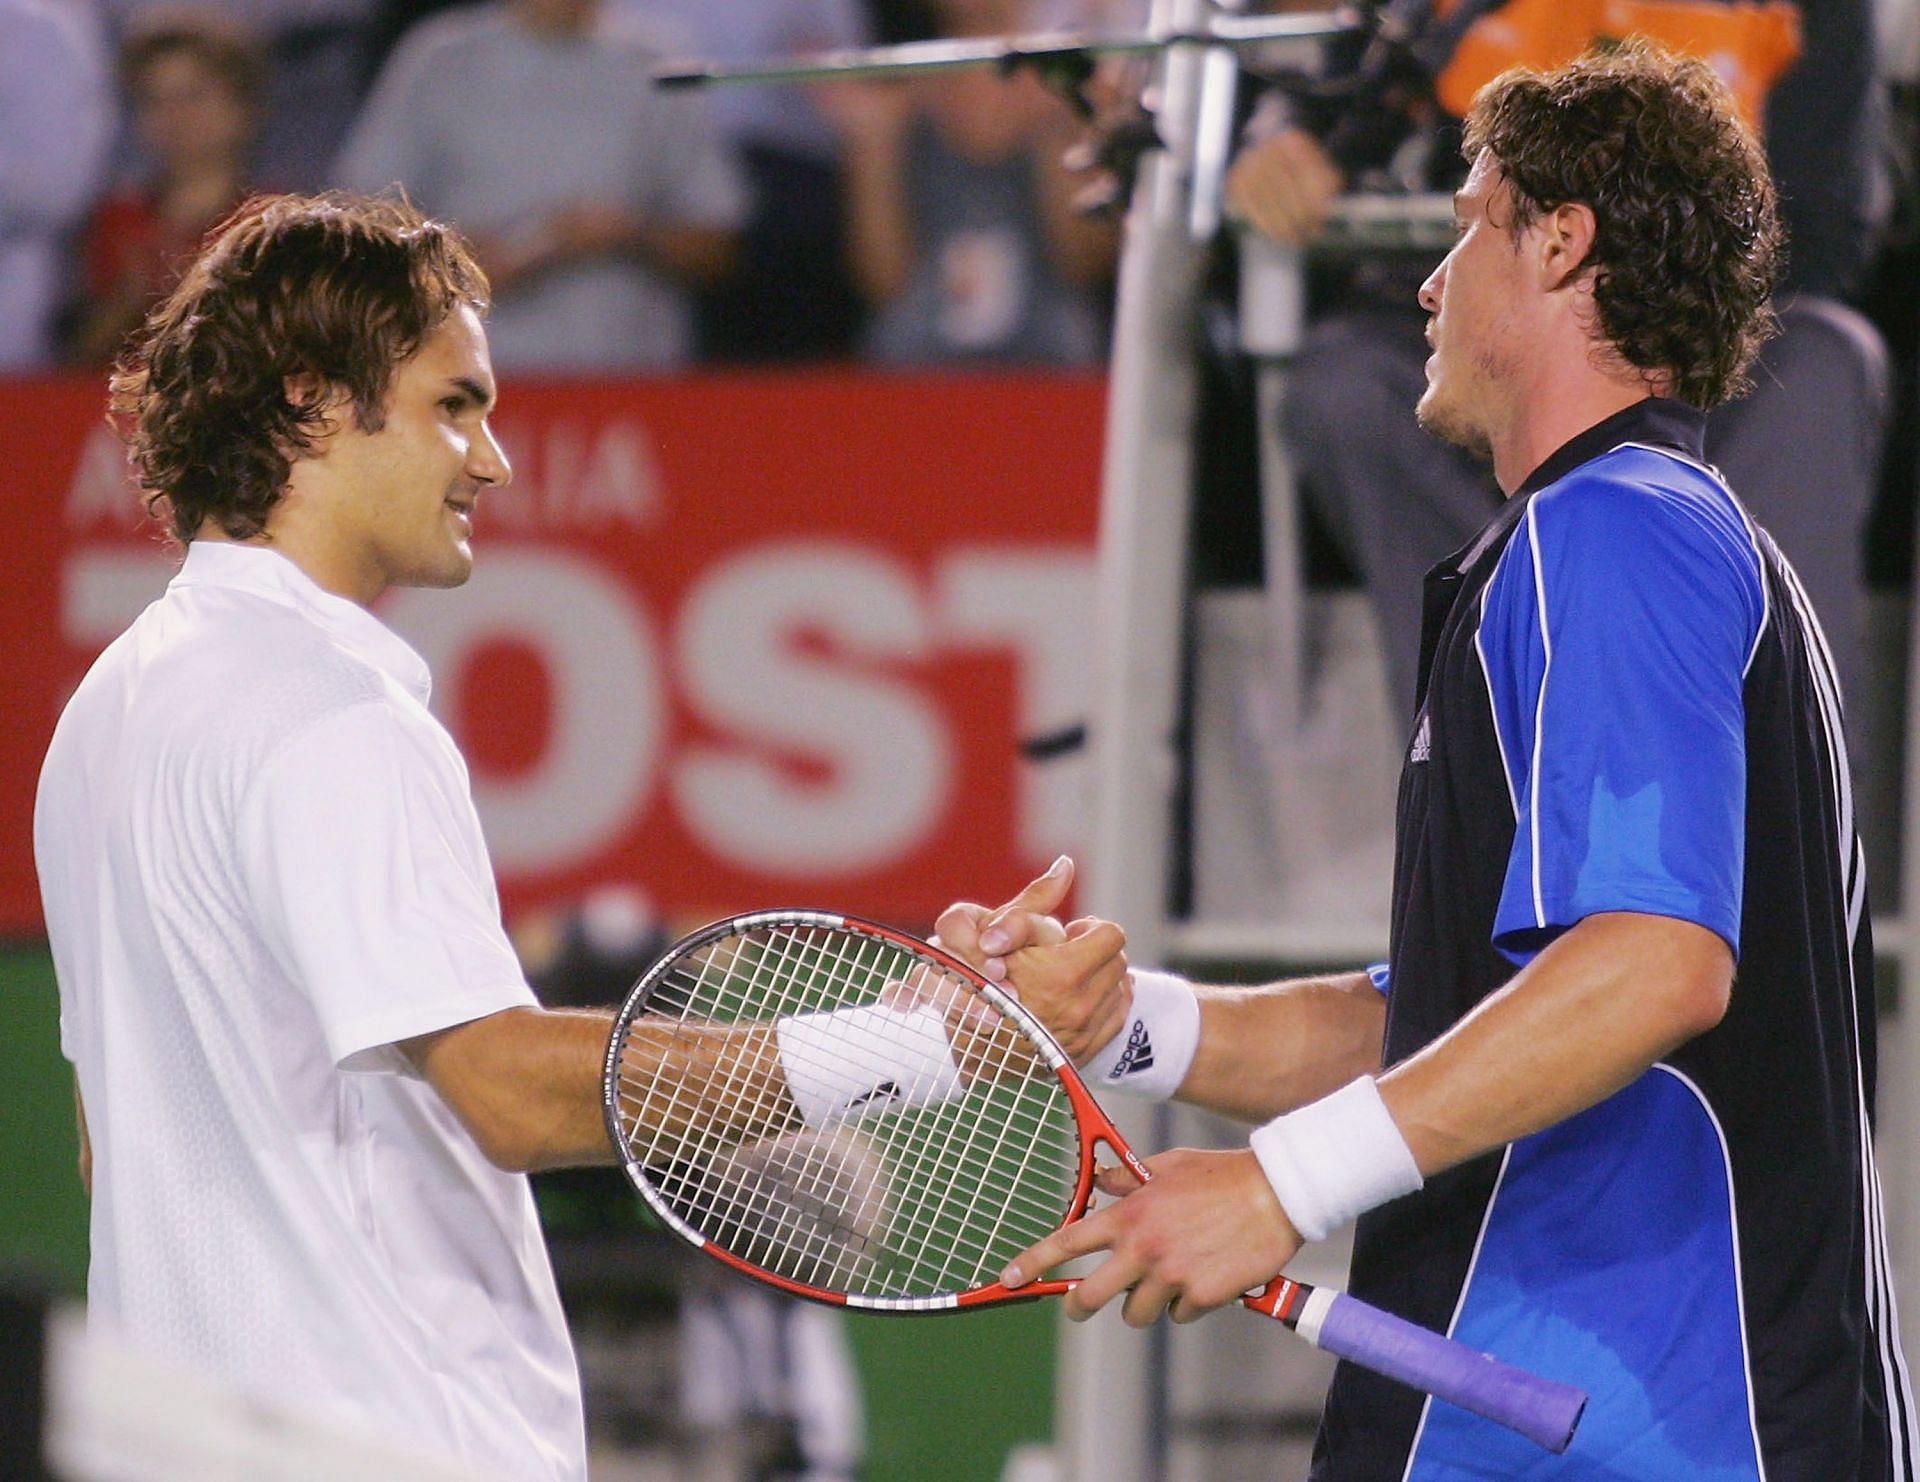 Safin avenged his 2004 Australian Open final defeat to Federer